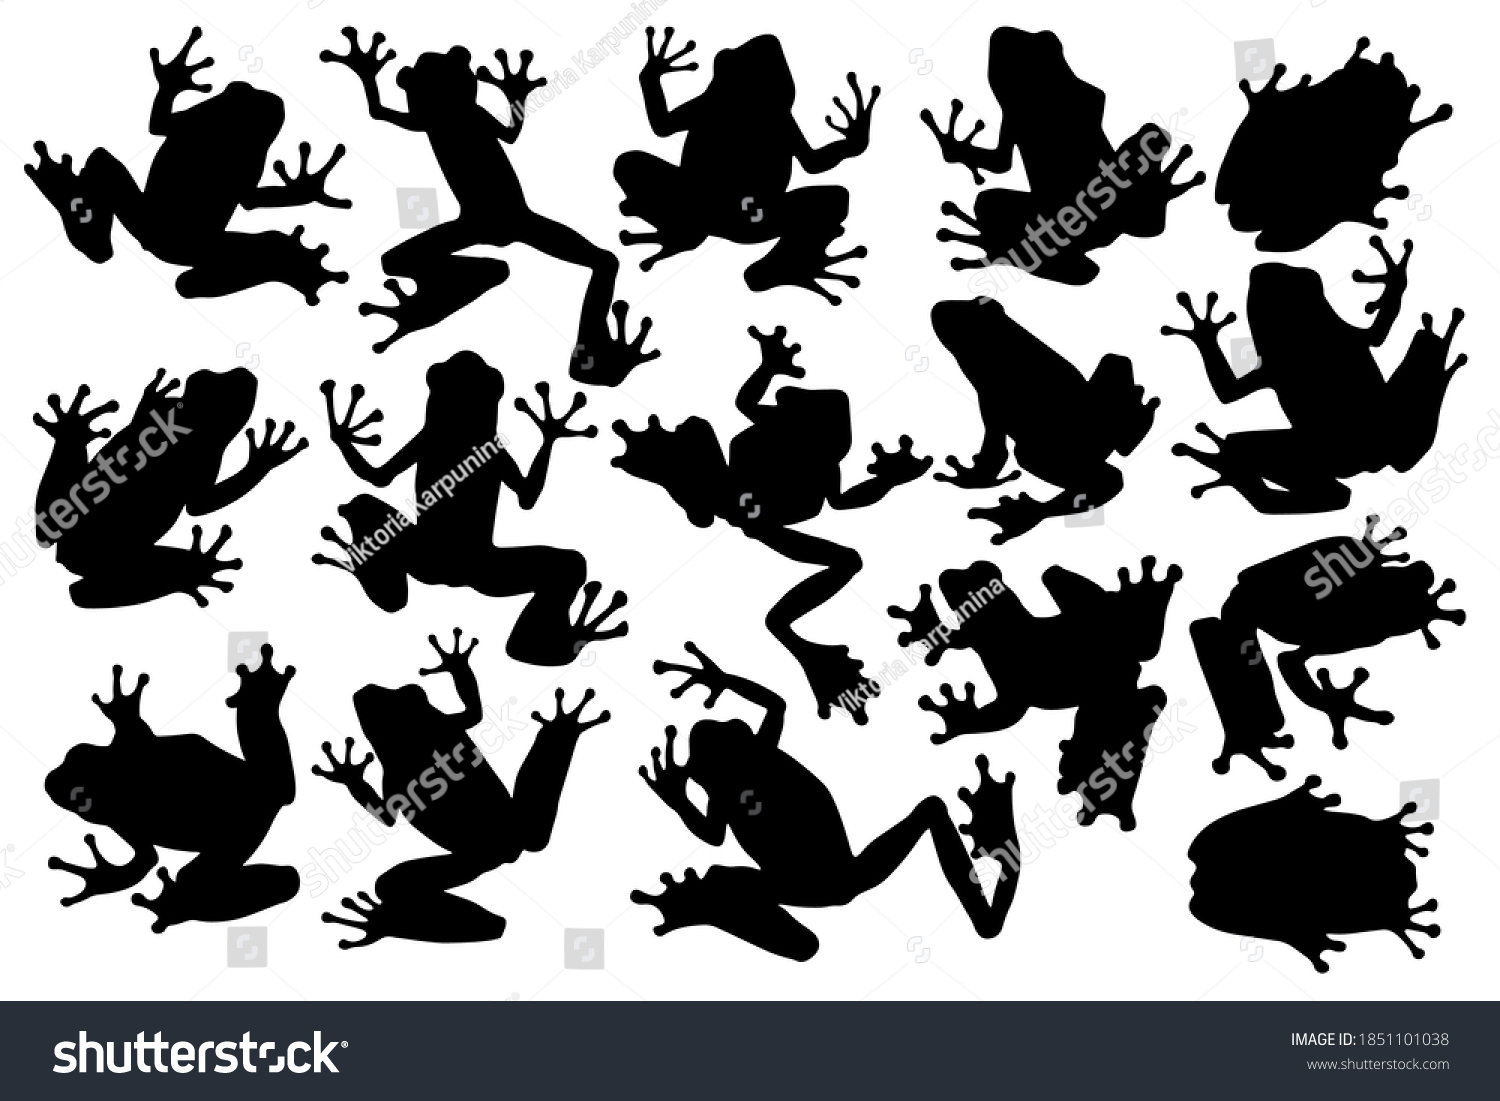 SVG of Hand drawn black vector silhouettes of tree frogs. Stock illustration of amphibians. svg